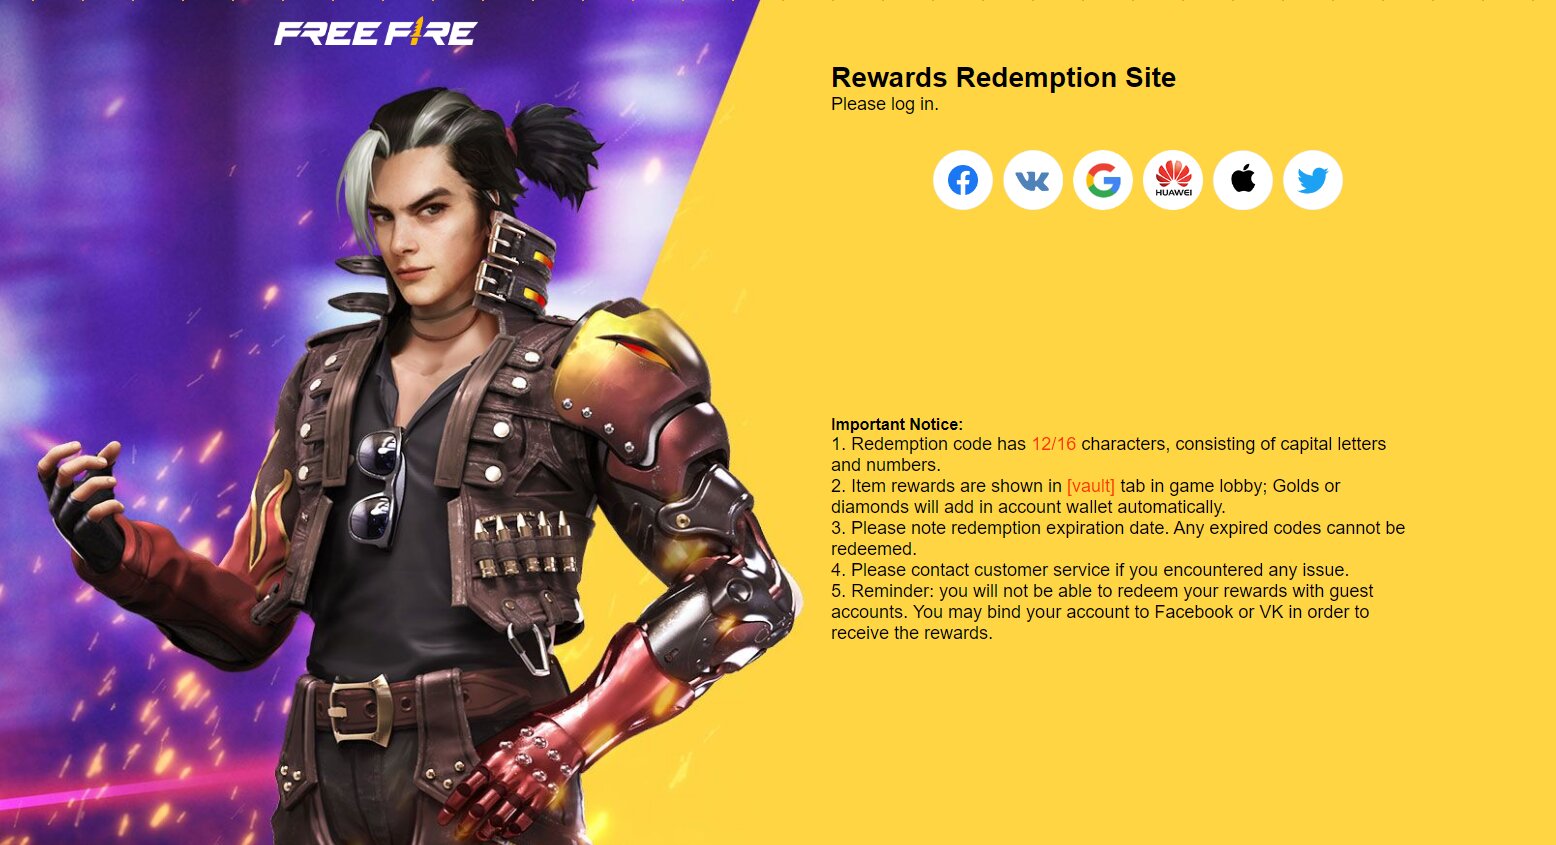 The image shows the rewards redemption site for the Free Fire game with reduced graphics quality and stable network connection.